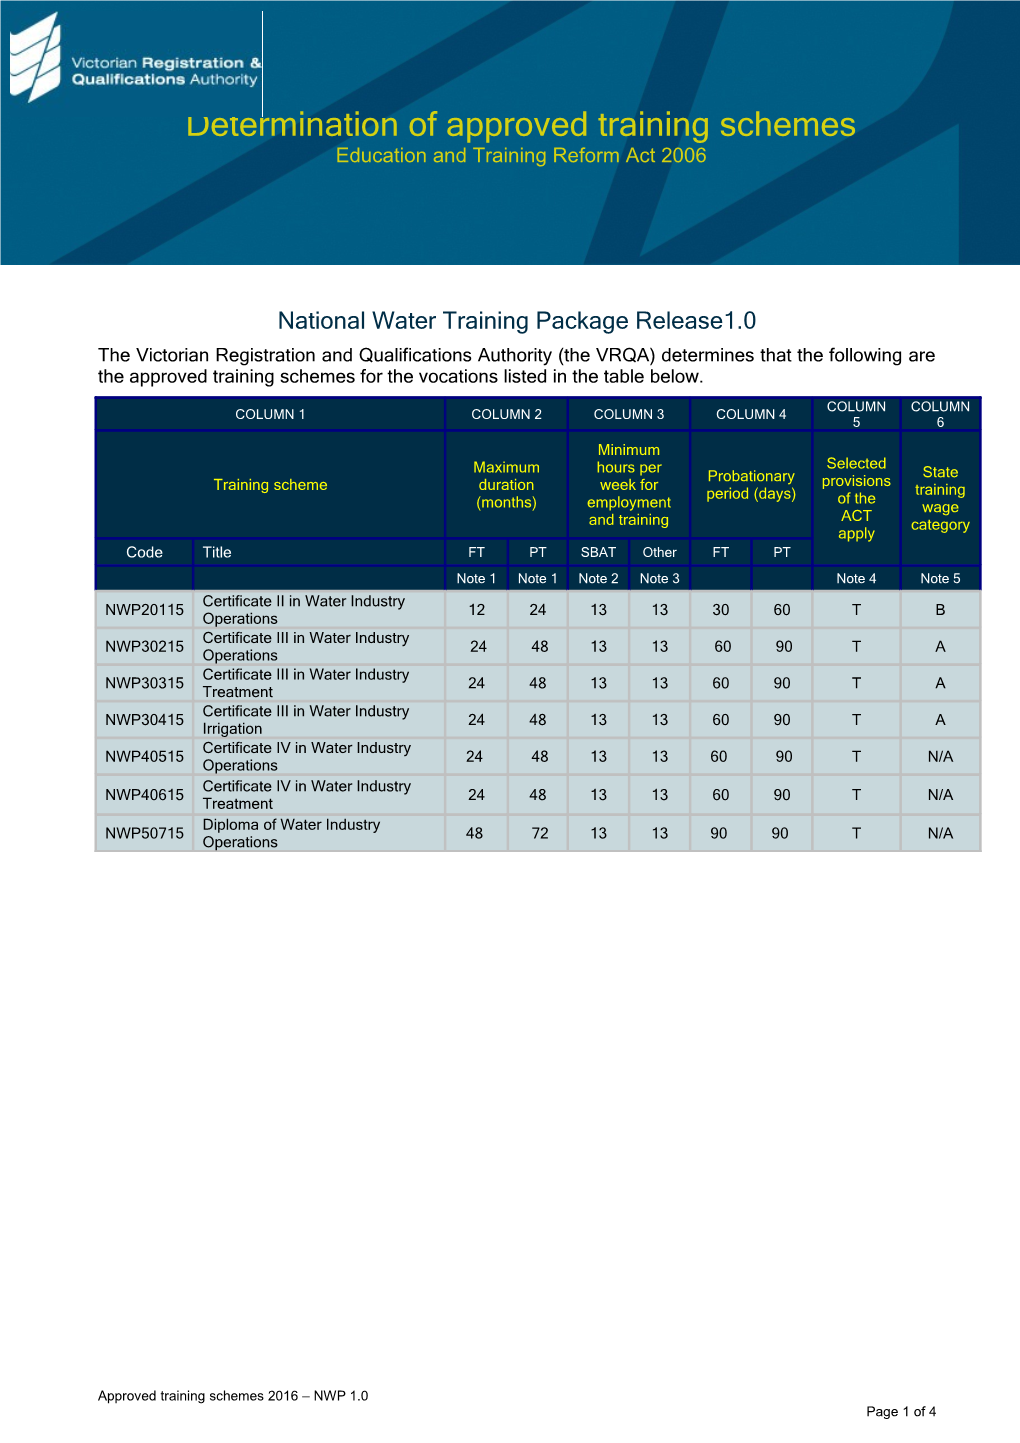 National Water Training Package Release1.0